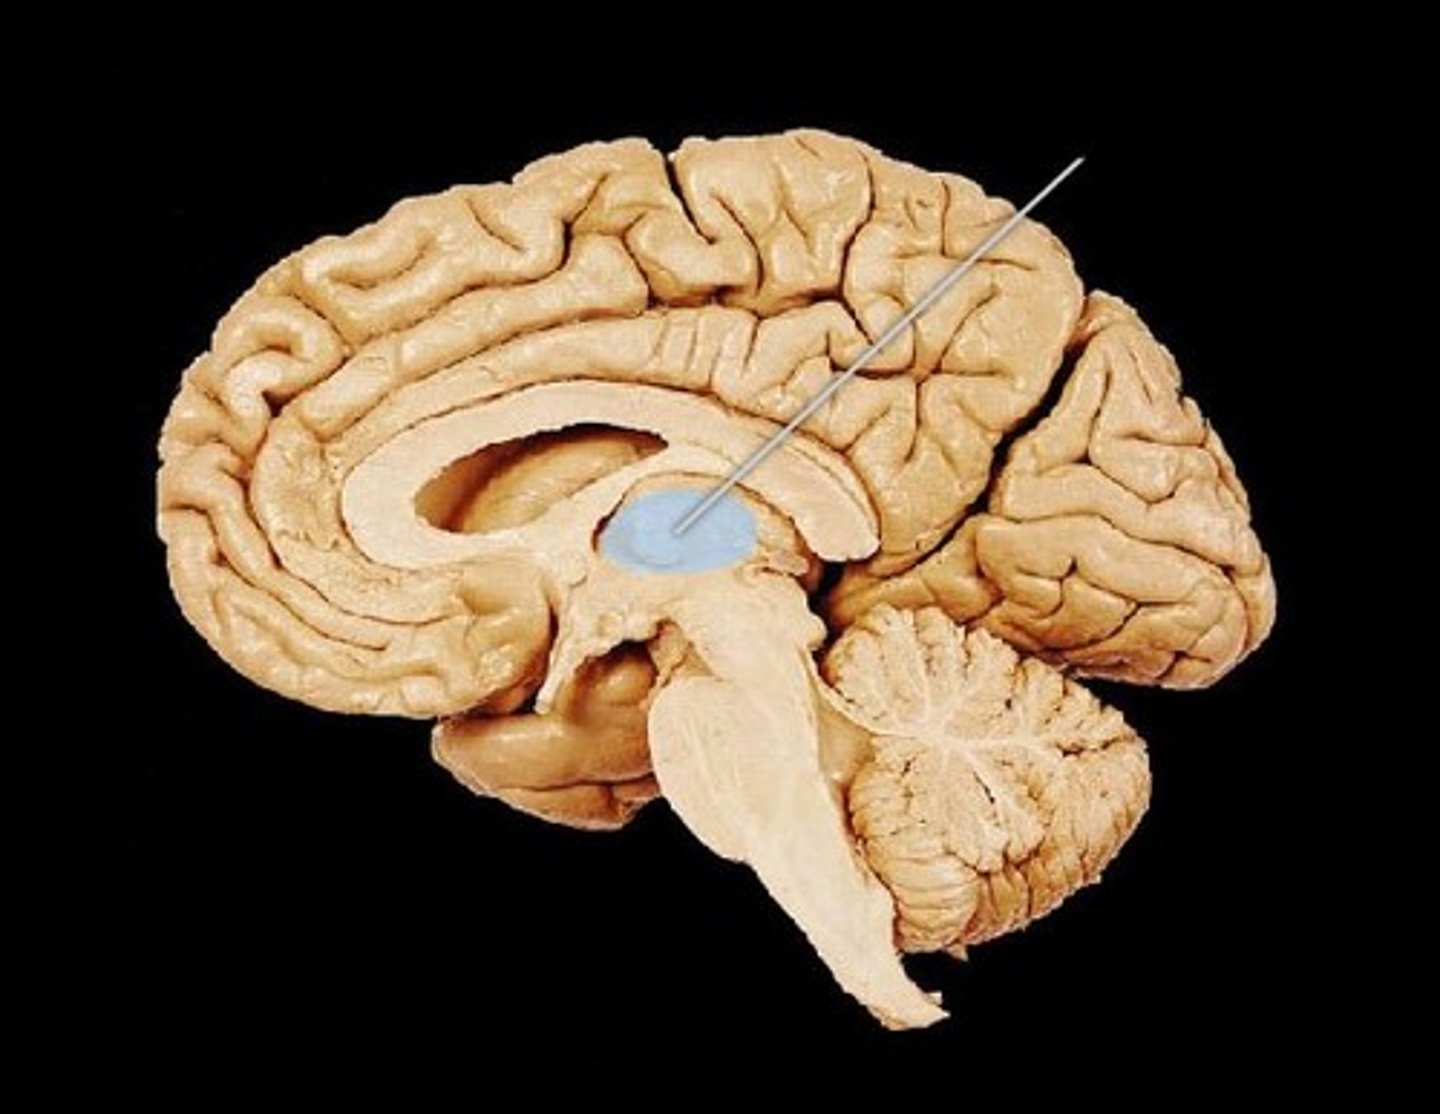 <p>subcortical structure that relays incoming sensory information to the cerebral cortex and other parts of the brain; a.k.a "sensory switchboard"</p>